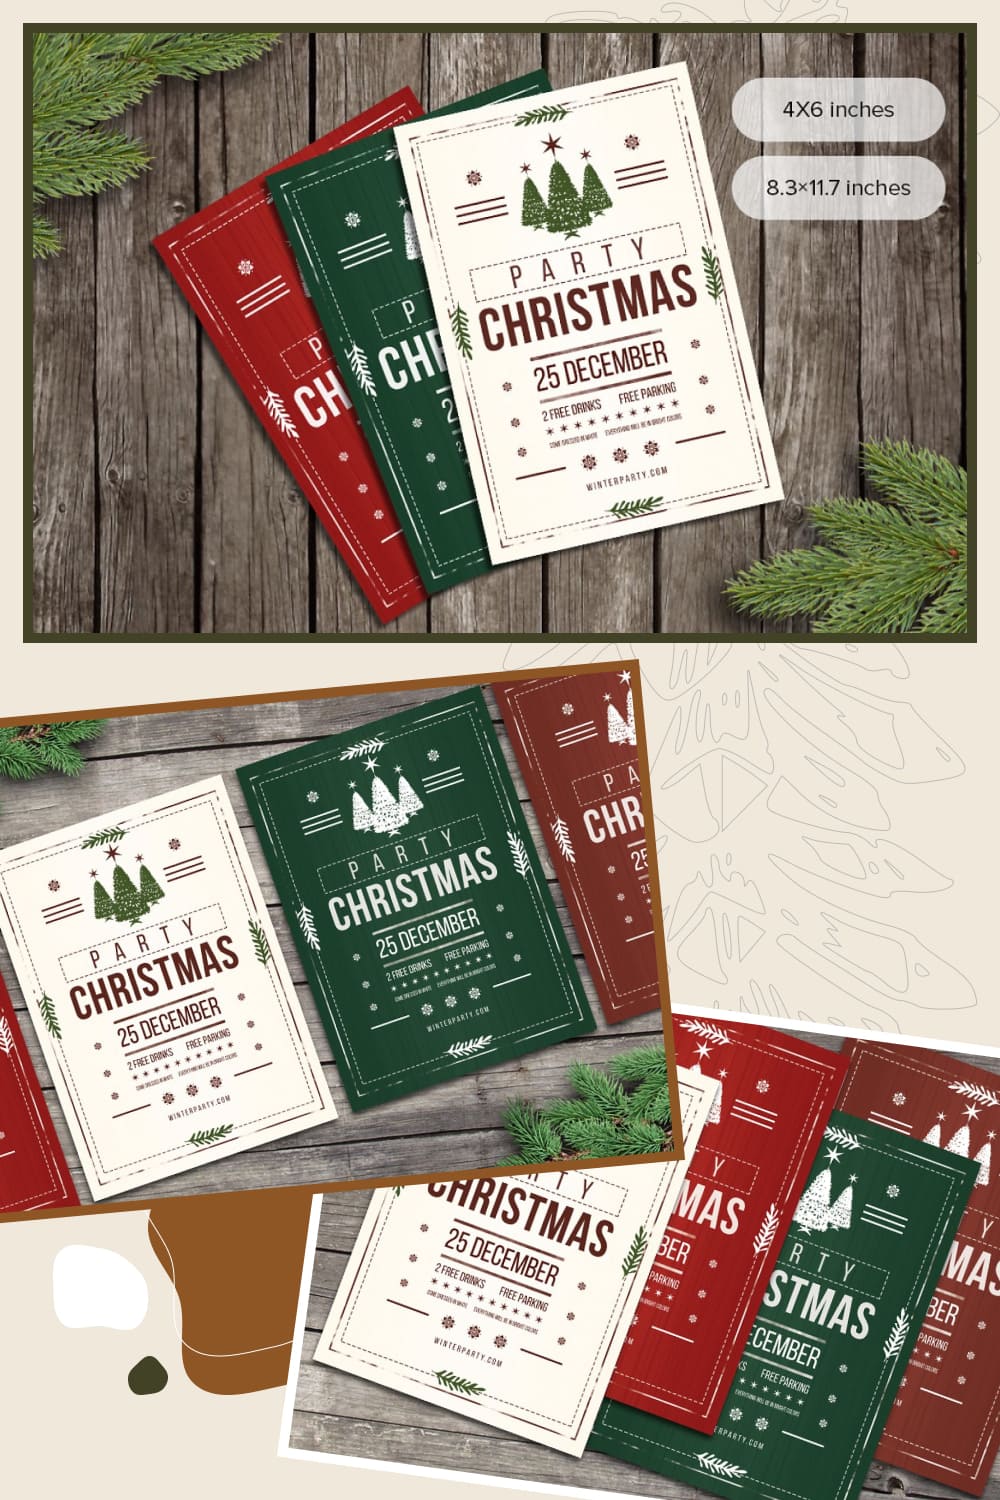 03 christmas flyers party rustic pinterest